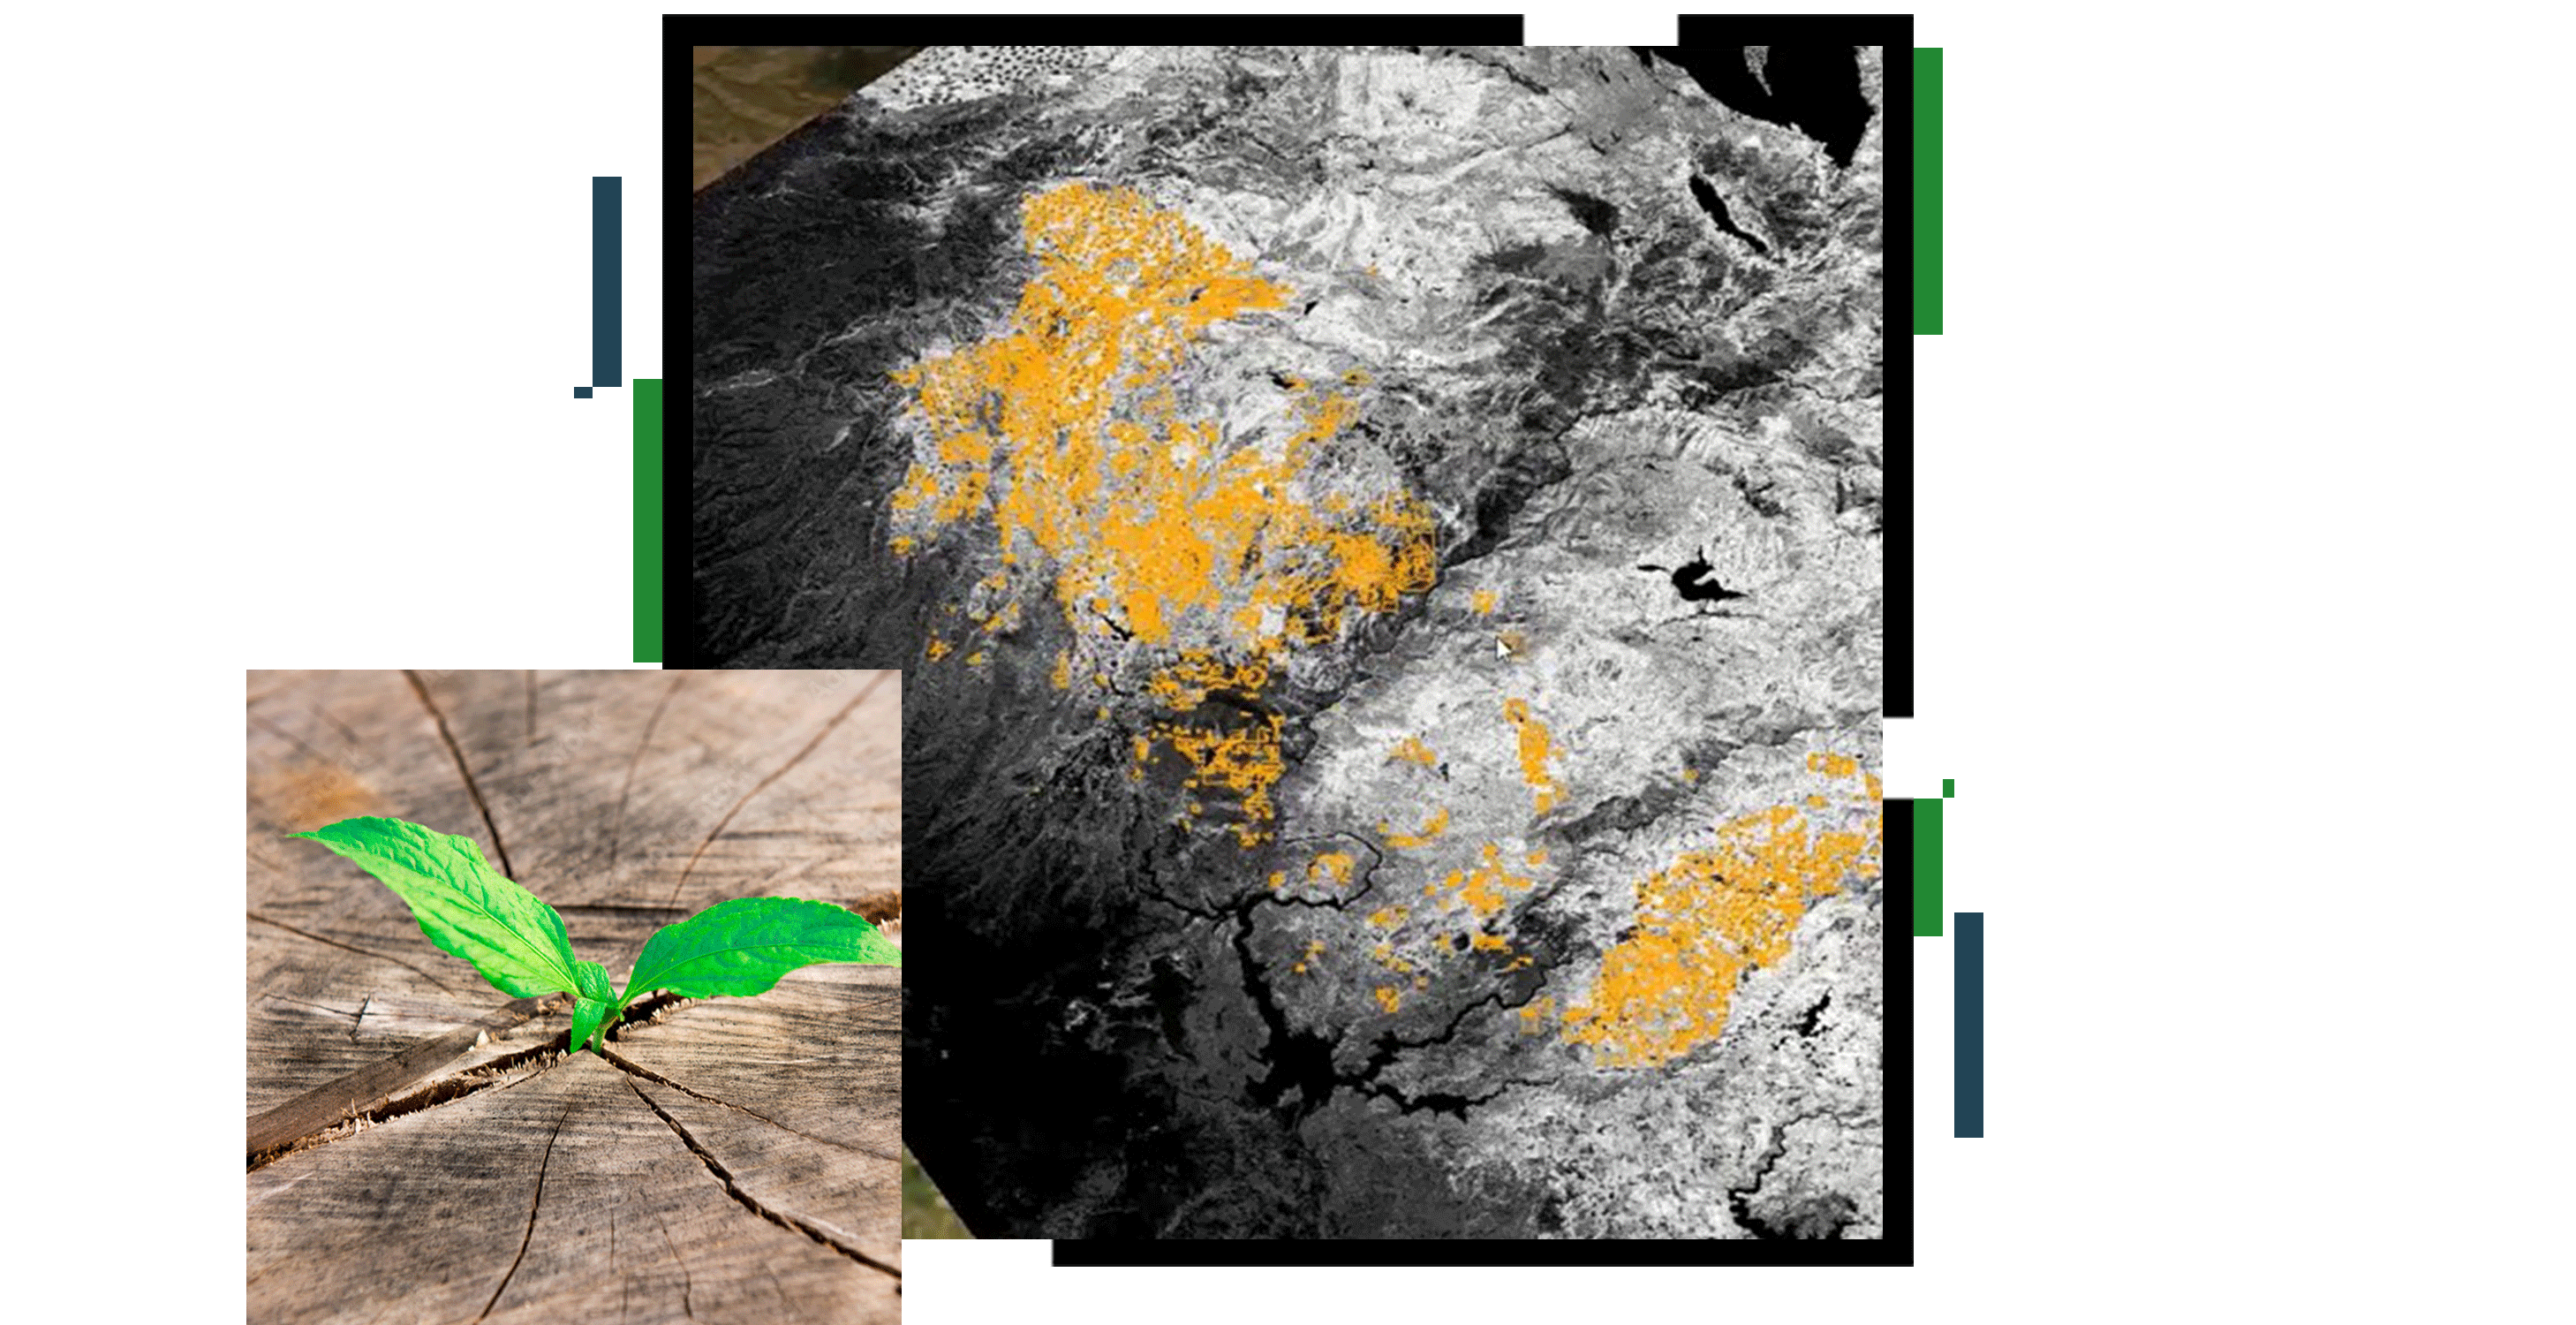 A contour map in white on black with parts highlighted in yellow, overlaid with a closeup photo of a bright green sprout emerging from a crack in dry earth